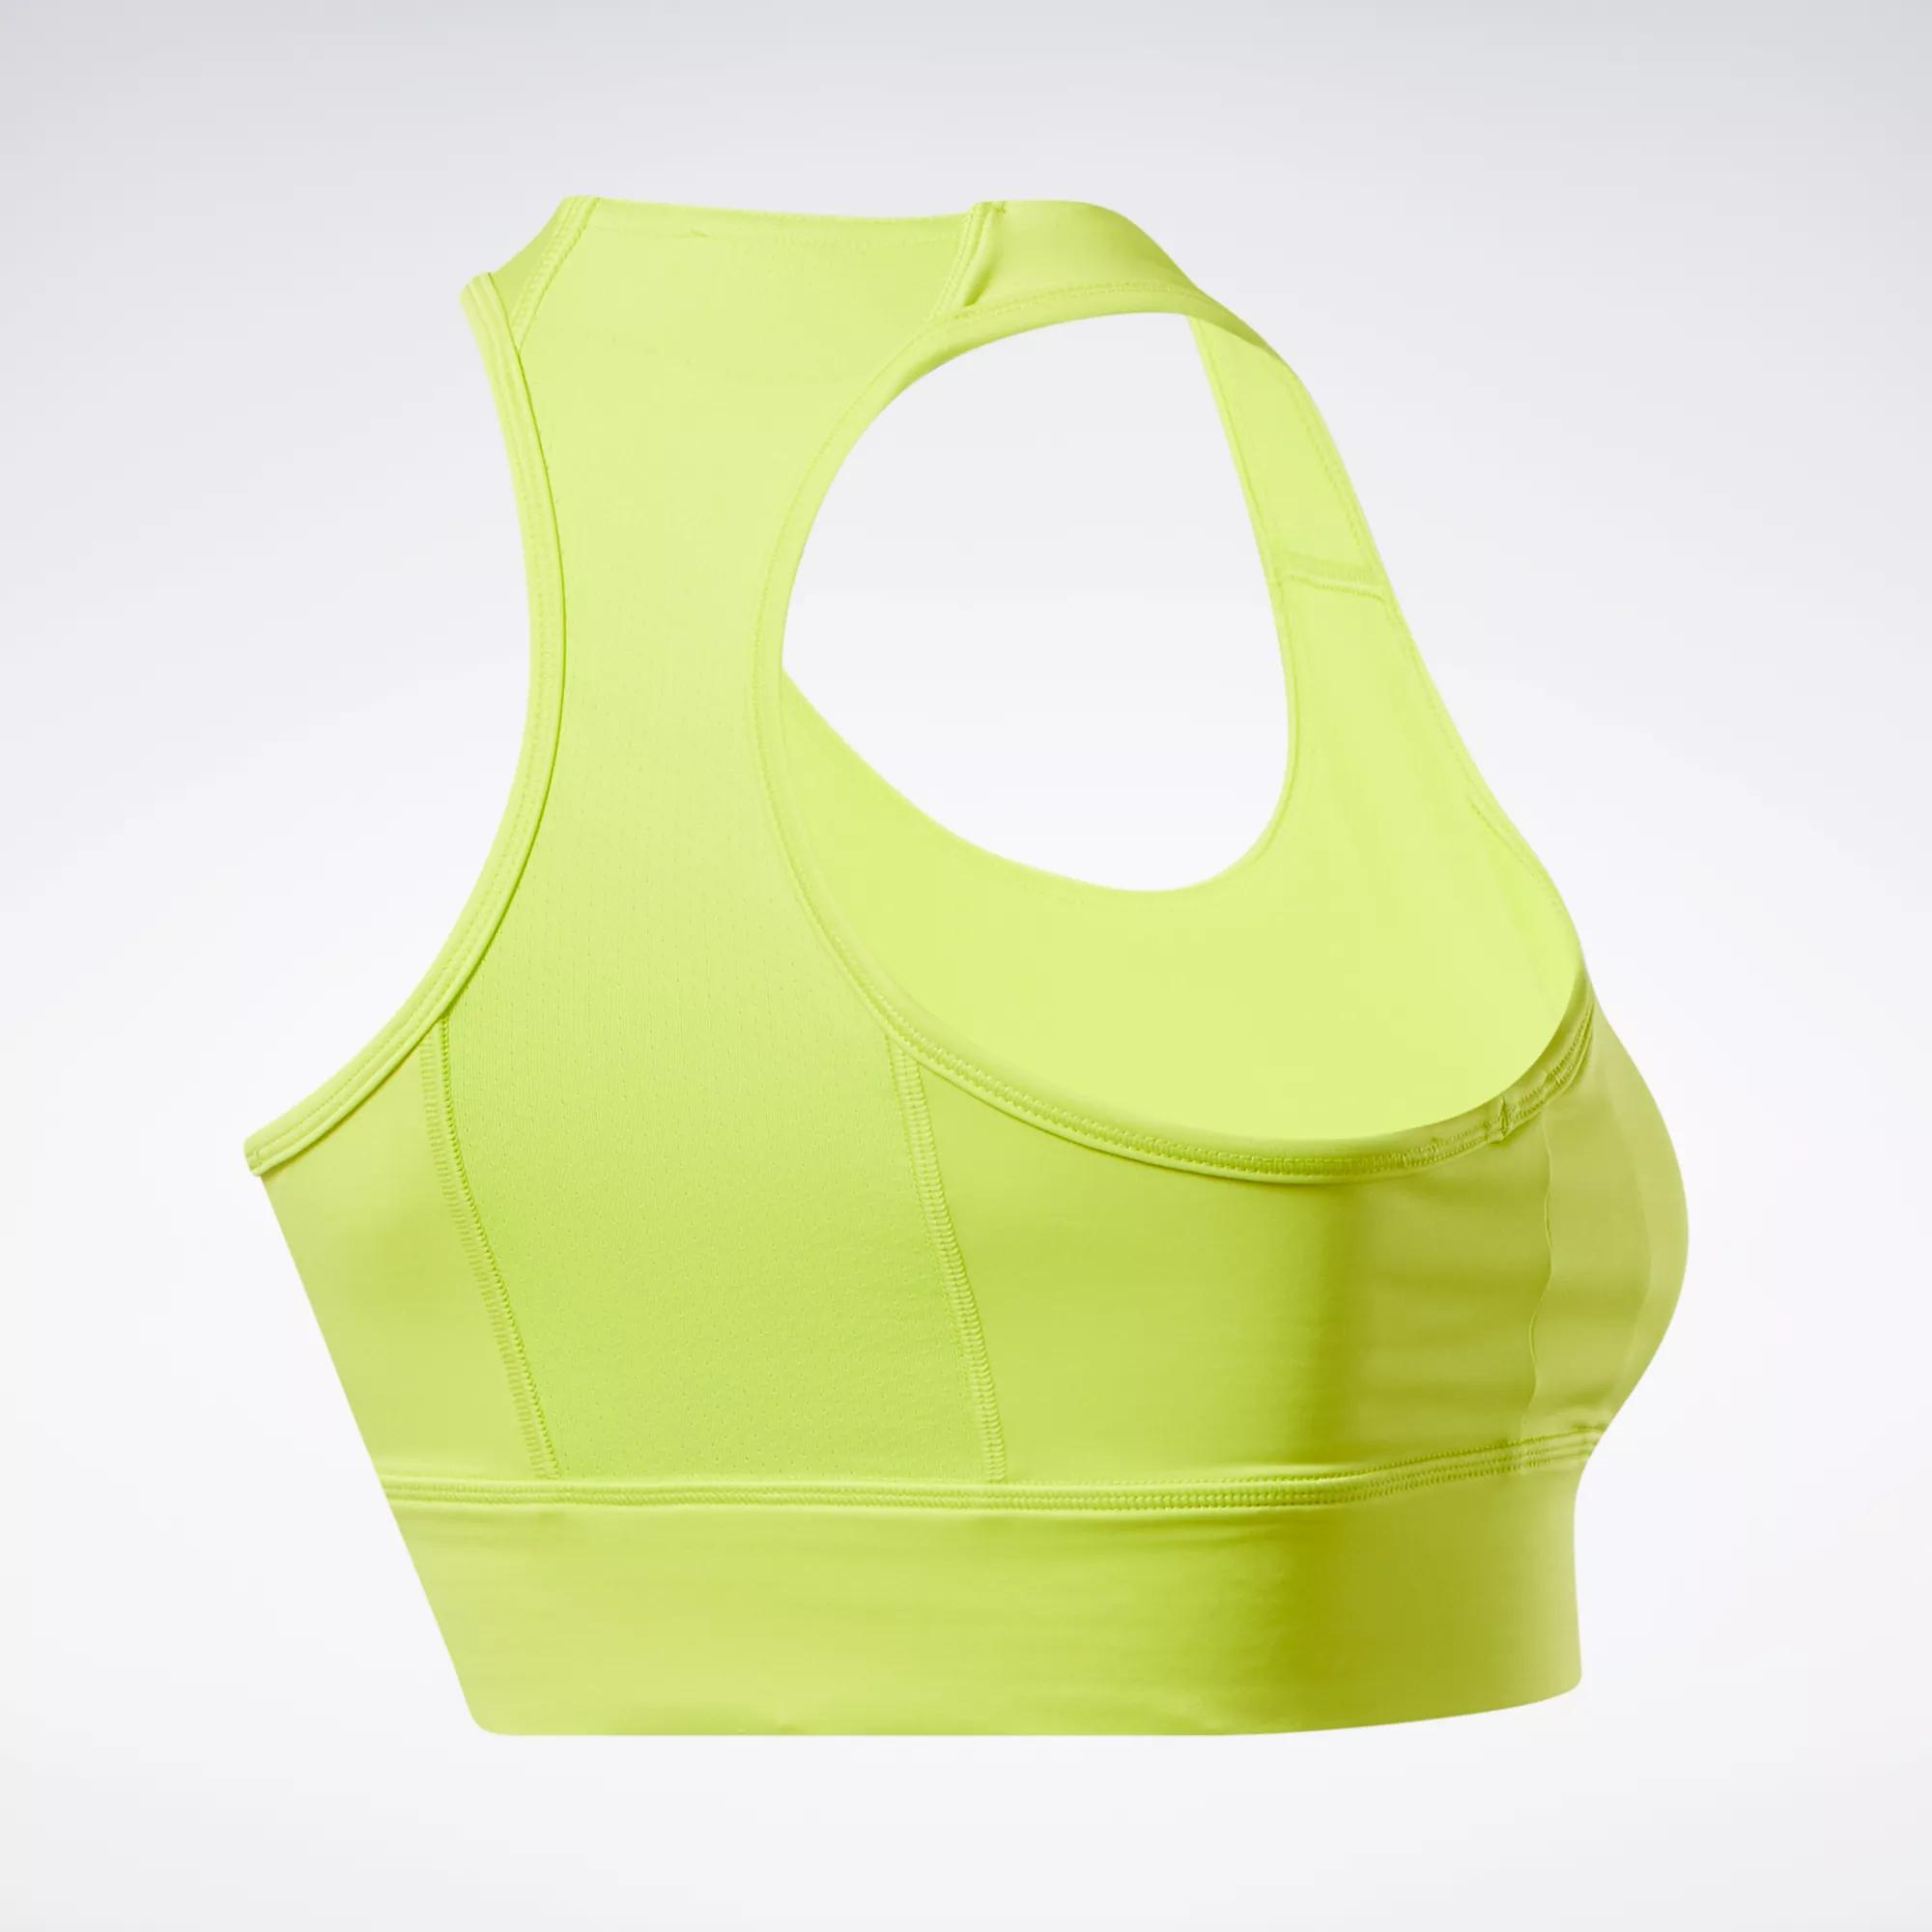 Nike Sports Bra High Support Size Large Neon Yellow Highlighter Bright  Color - $15 (66% Off Retail) - From Royal